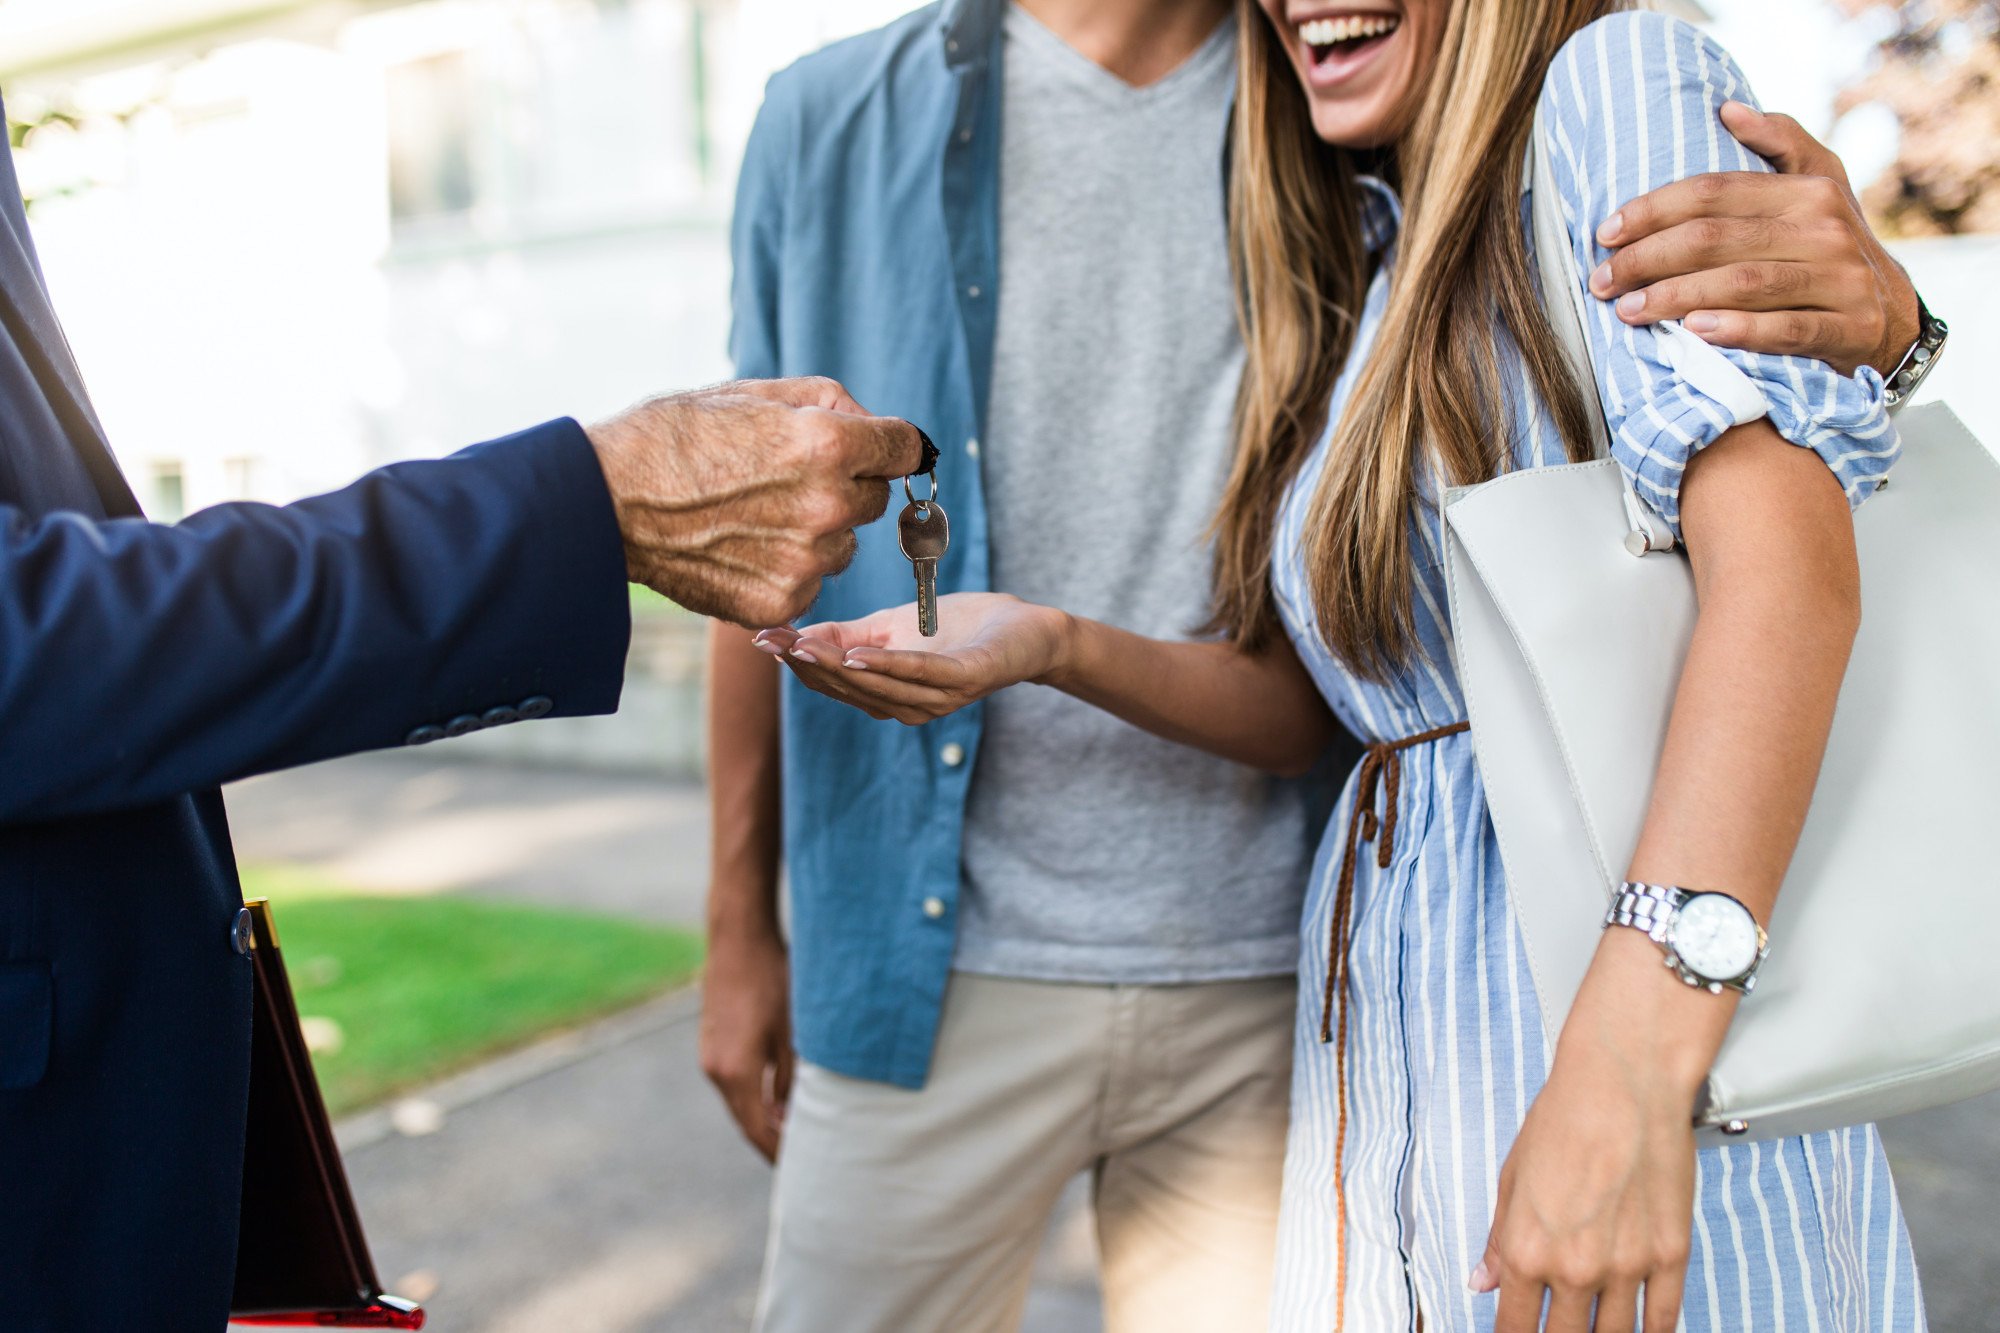 Did you know that not all realtors are created equal these days? Here's how simple it actually is to choose the best real estate agent in your local area.